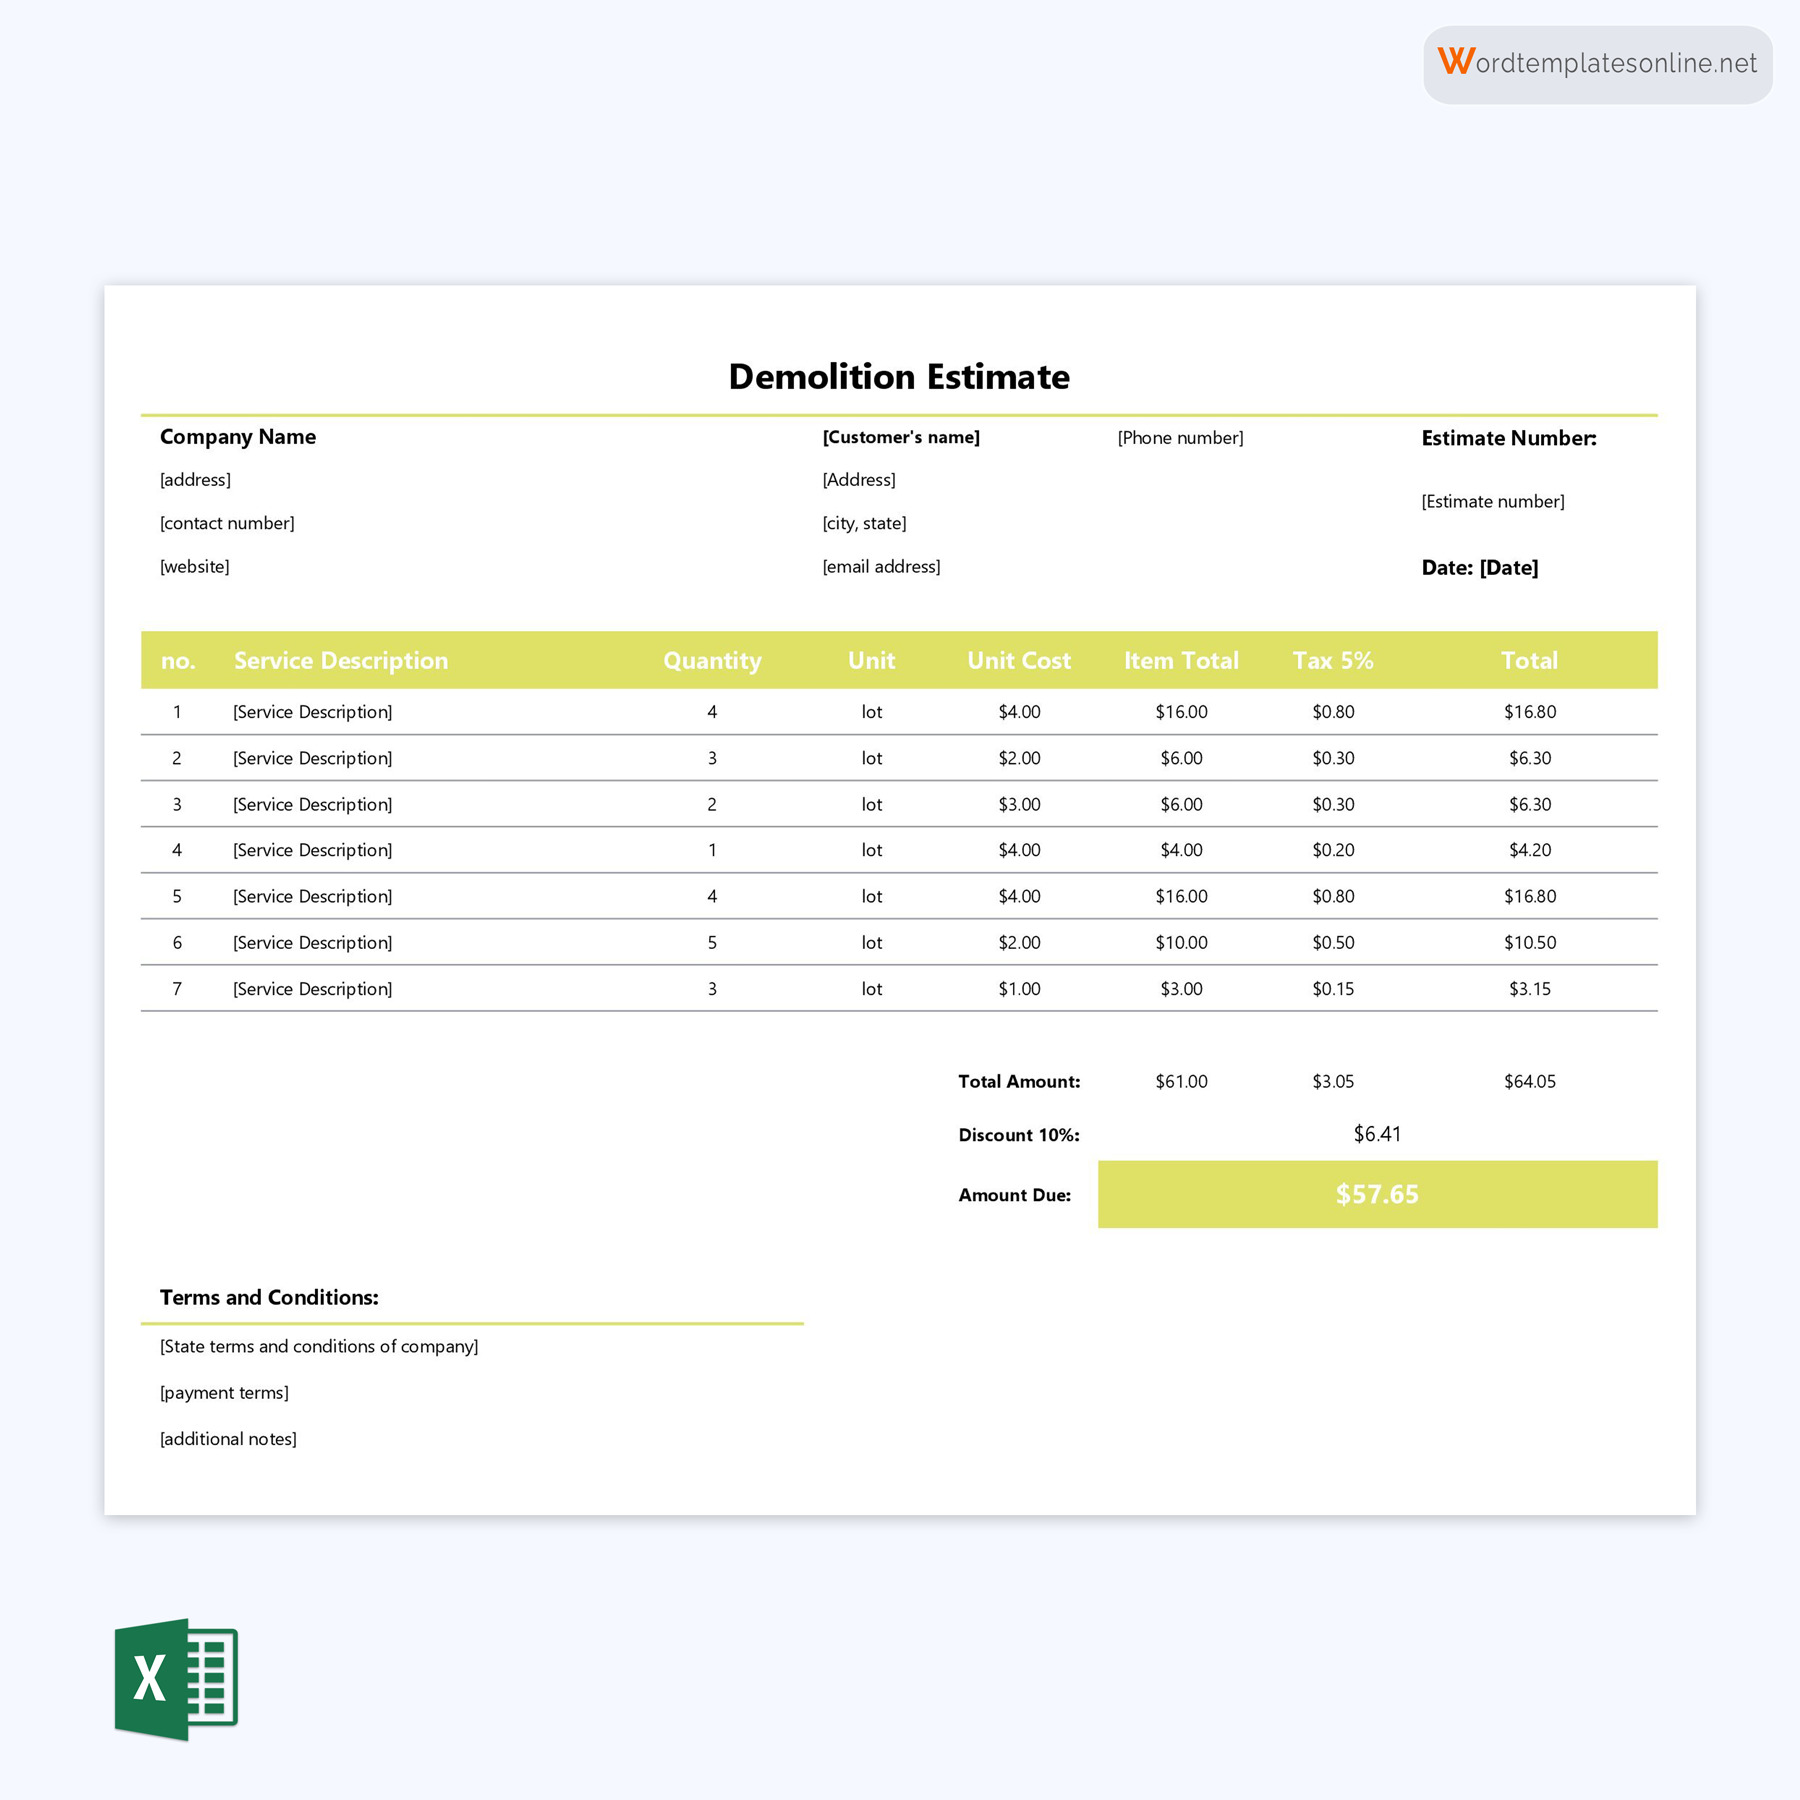 Download Free Demolition Estimate Format: Sample Template Available